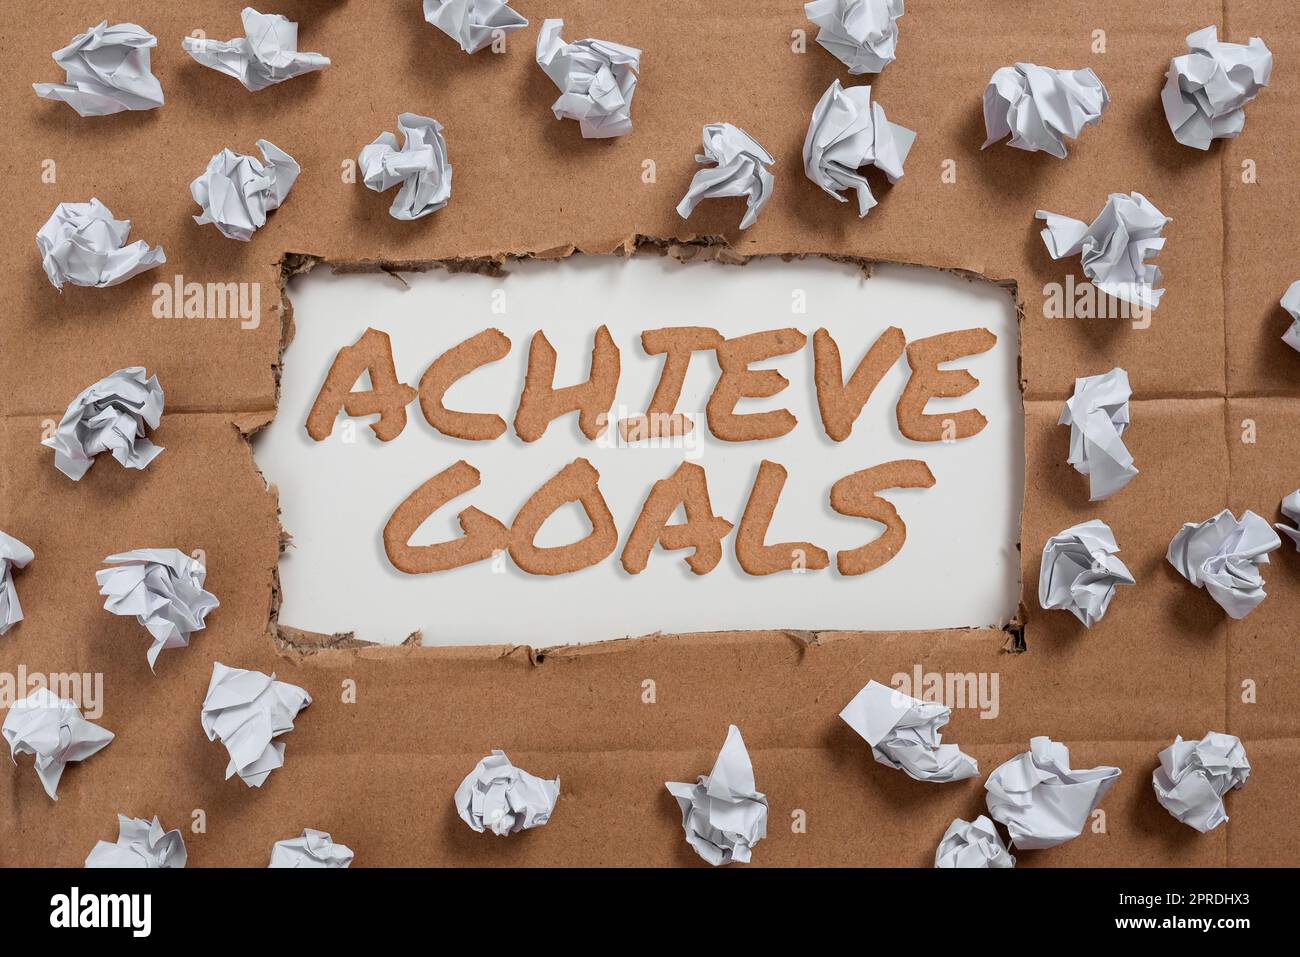 Text caption presenting Achieve Goals. Business approach Results oriented Reach Target Effective Planning Succeed Important Ideas Written Under Ripped Cardboard With Paper Wraps Around. Stock Photo